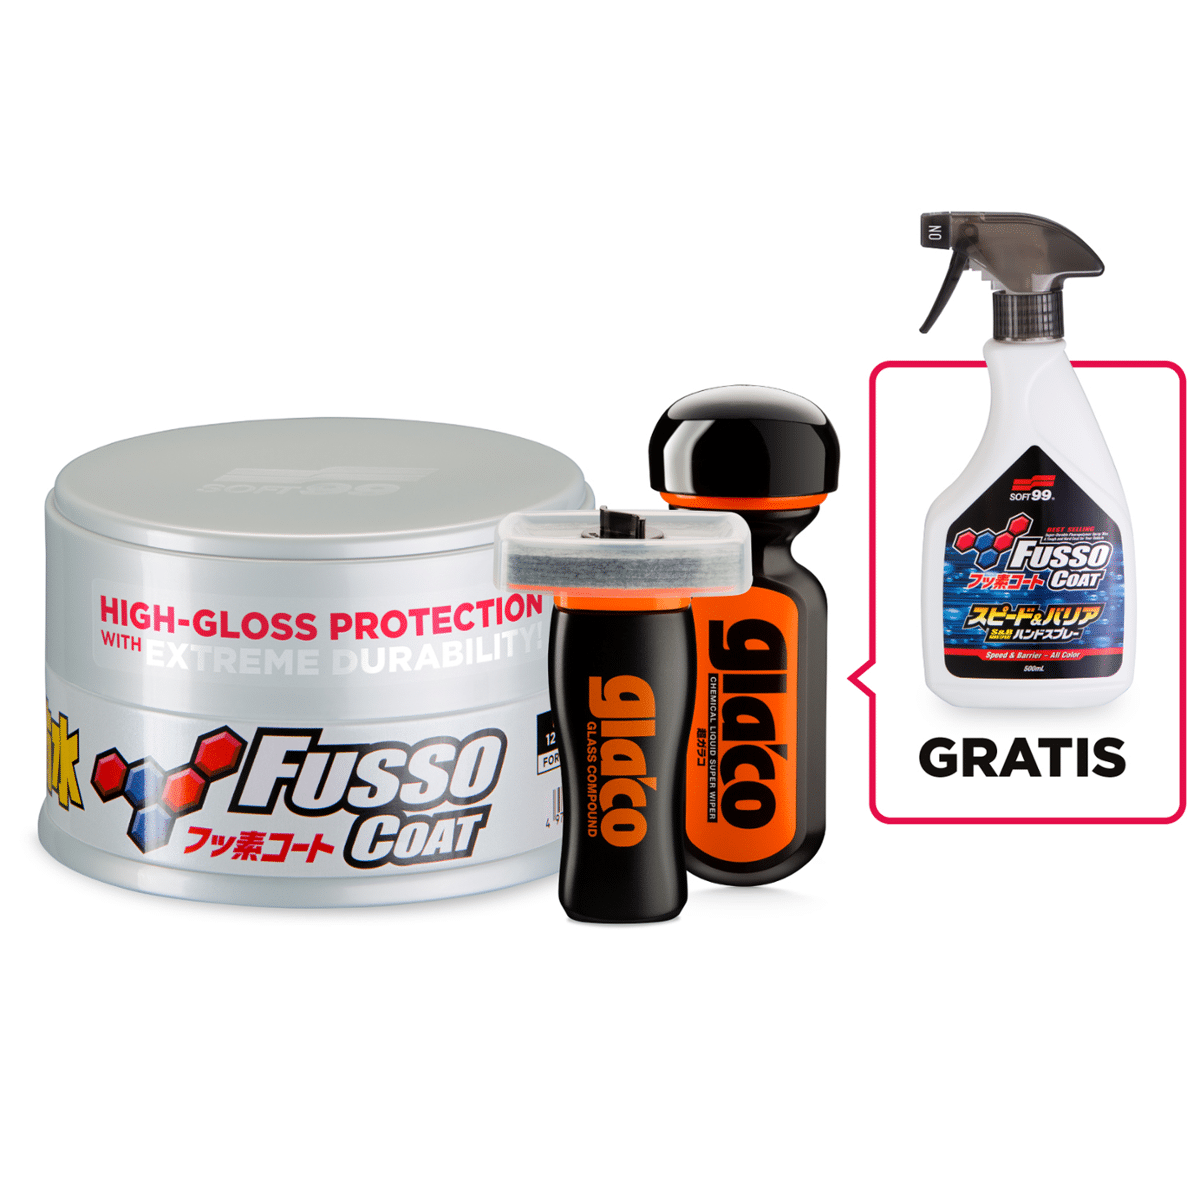 SOFT99 Ultimate Set Fusso Coat Light + Ultra Glaco+Glass Compound + Fusso Coat Speed&Barier